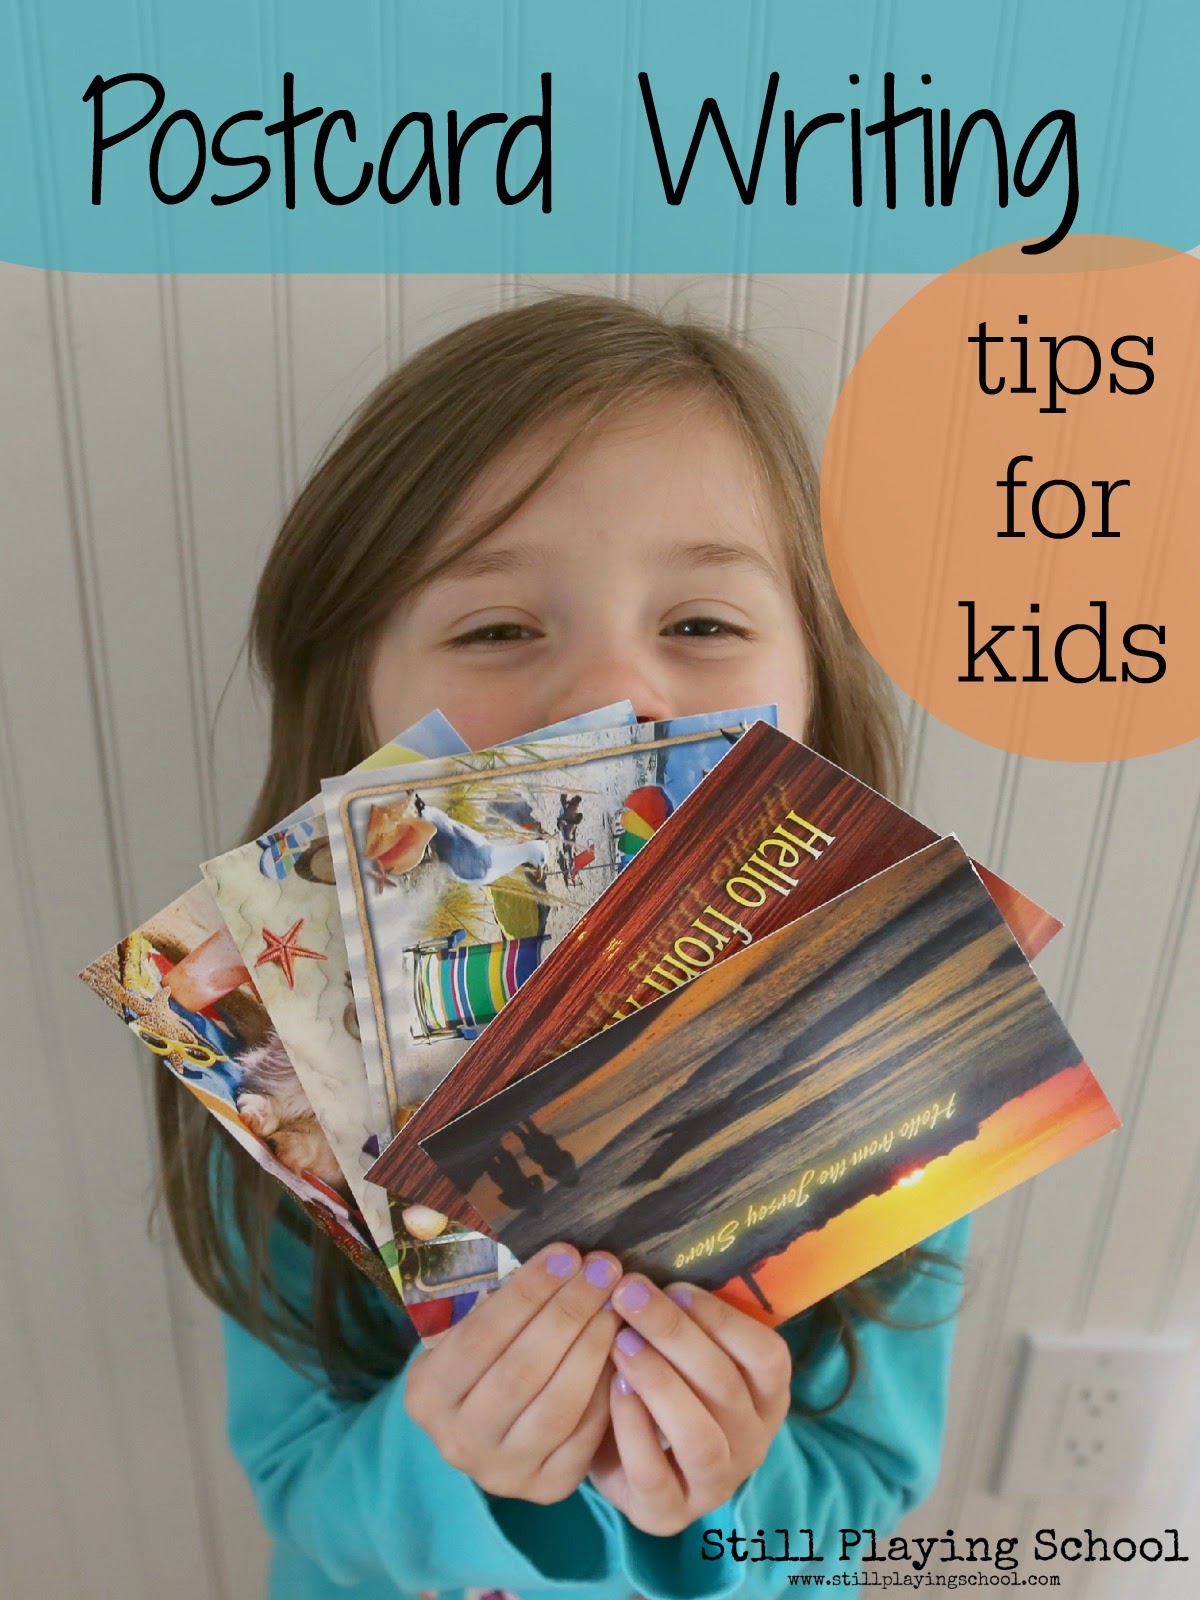 Writing postcards is perfect summer literacy practice for kids!